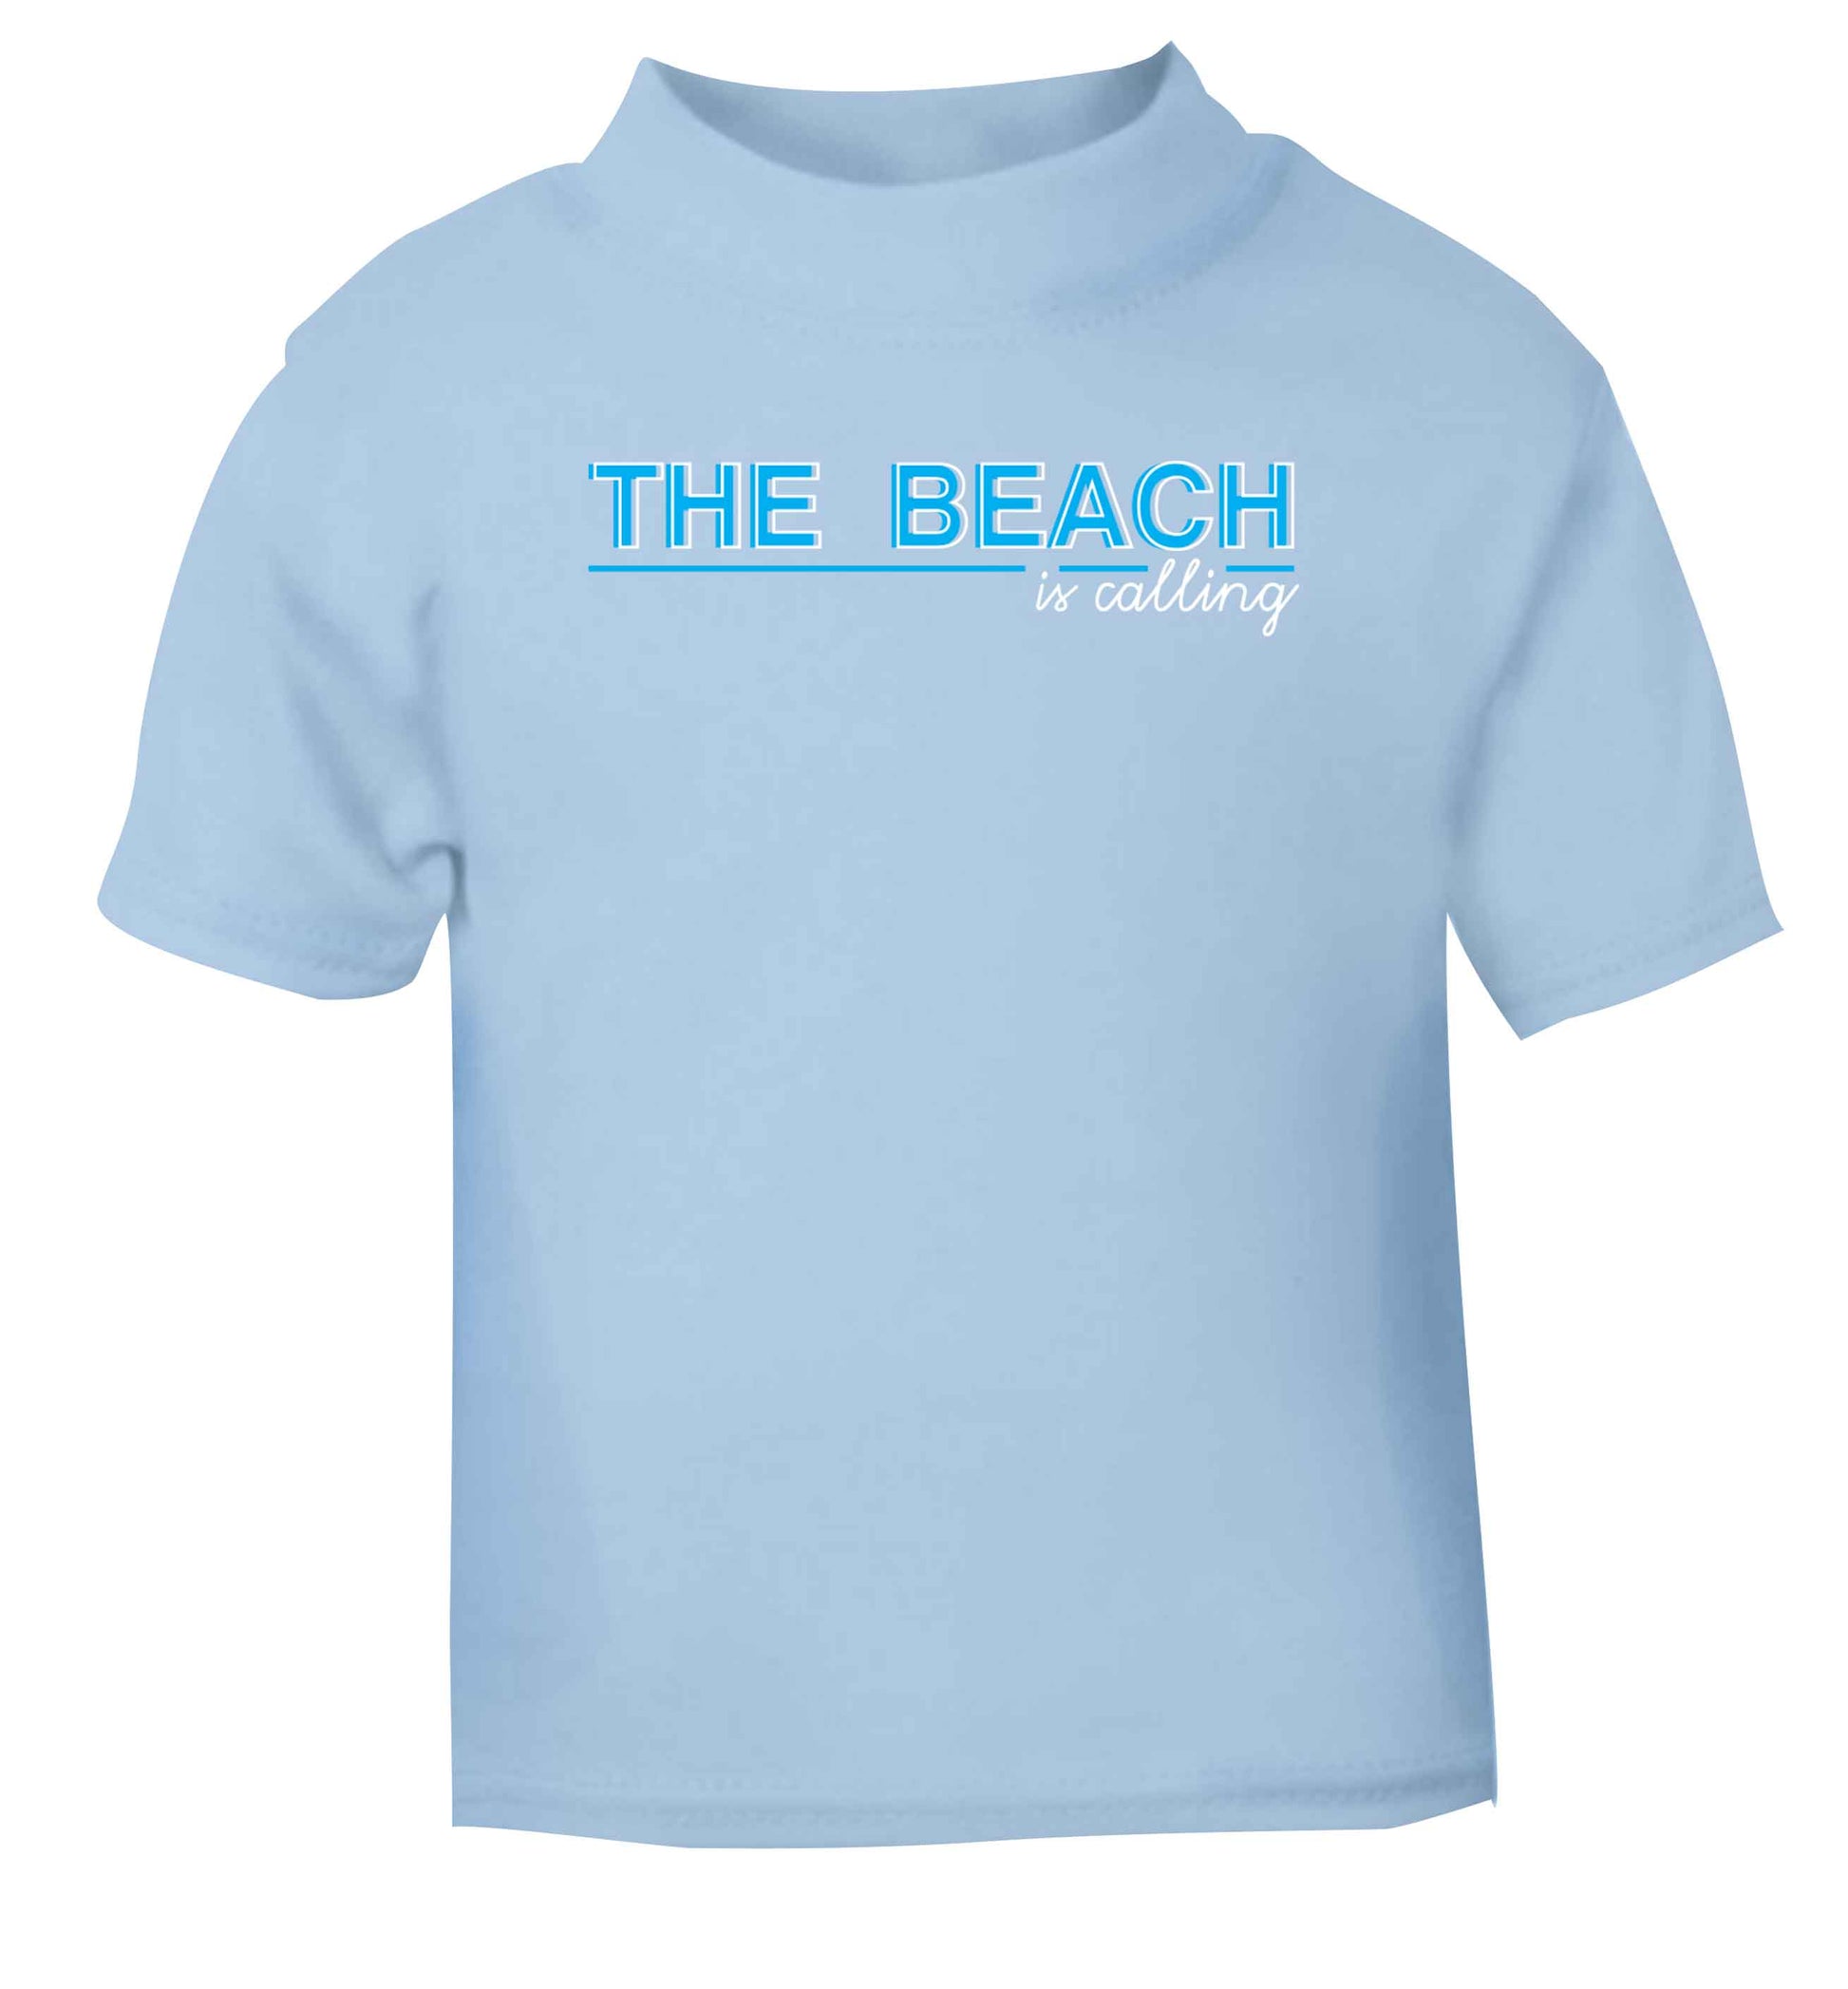 The beach is calling light blue Baby Toddler Tshirt 2 Years